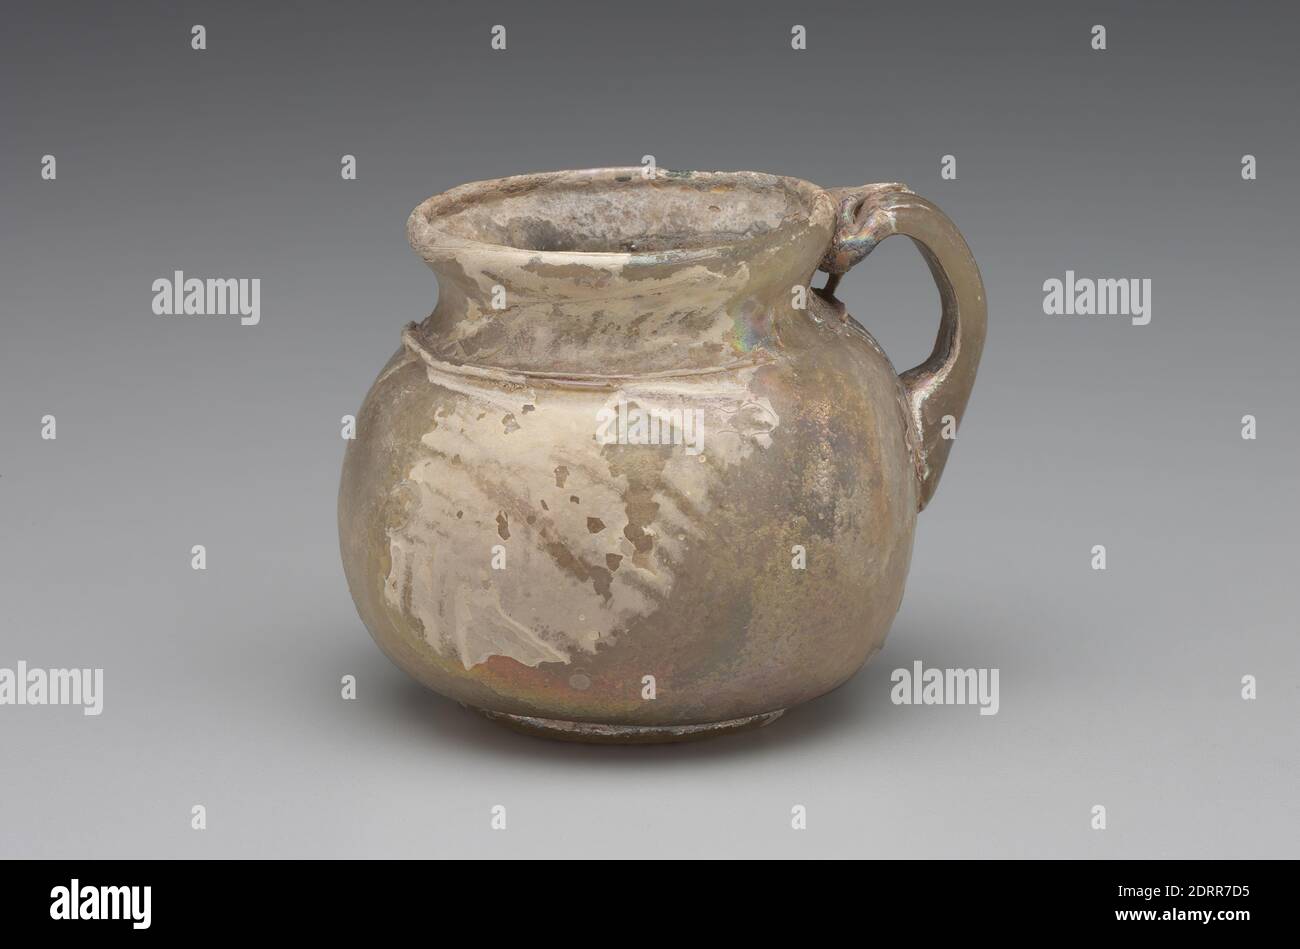 Ovoid Jug, 3rd–4th century A.D., Free-blown glass, pale yellowish green, 1 15/16 in. (5 cm), Roman, Eastern Mediterranean, Roman-Byzantine, Containers - Glass Stock Photo